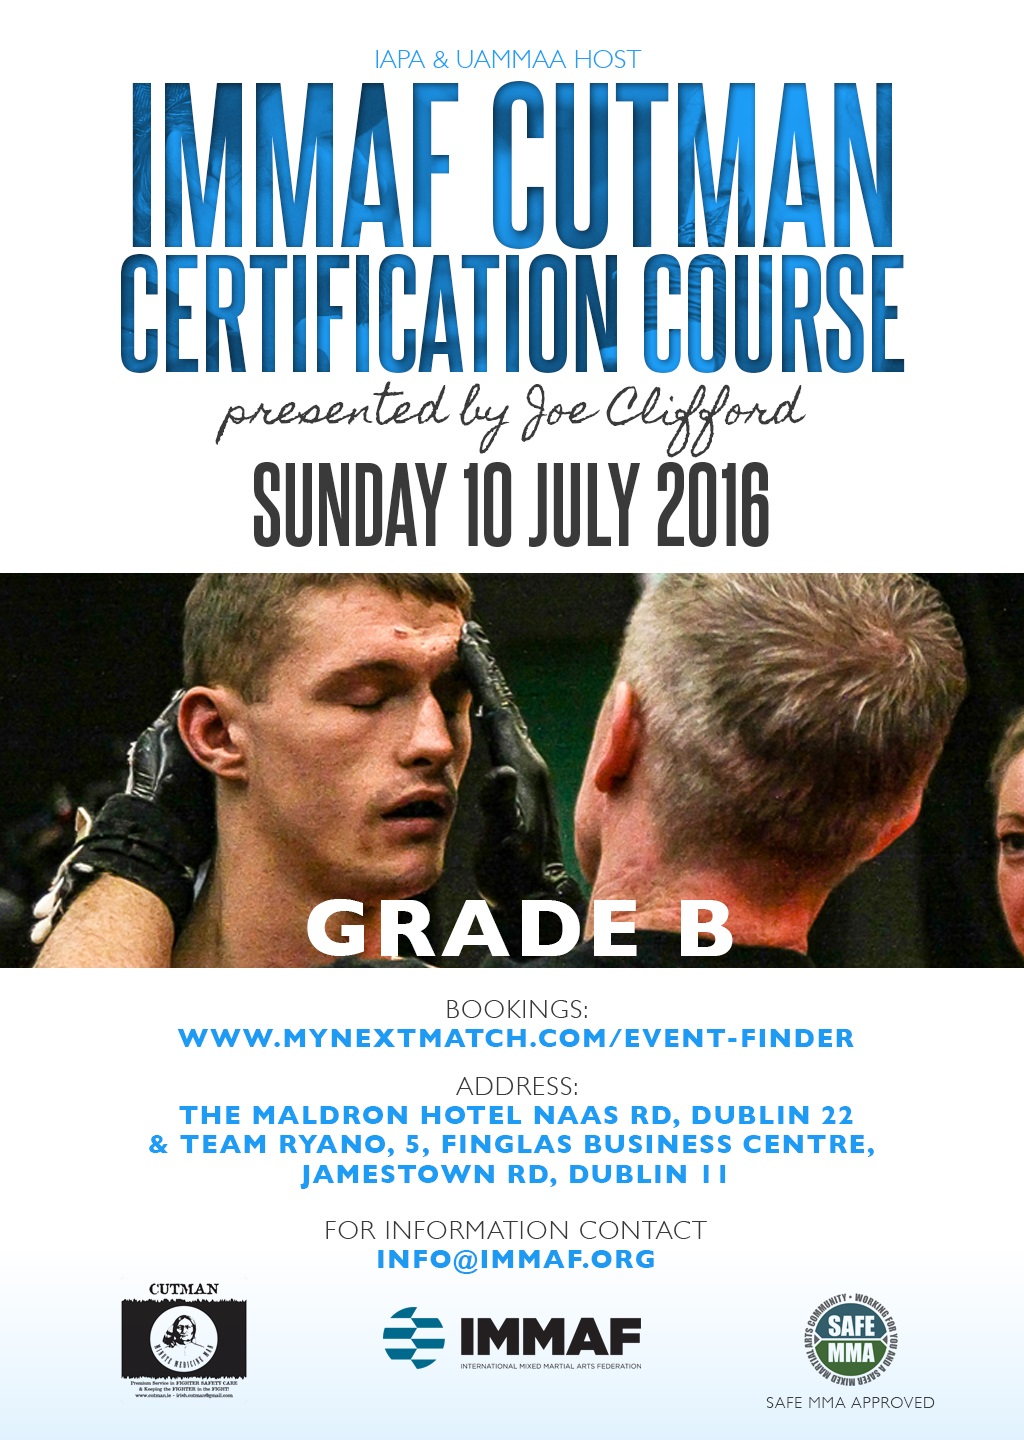 IMMAF LAUNCHES LEVEL 2 CUTMAN COURSE WITH JOE CLIFFORD